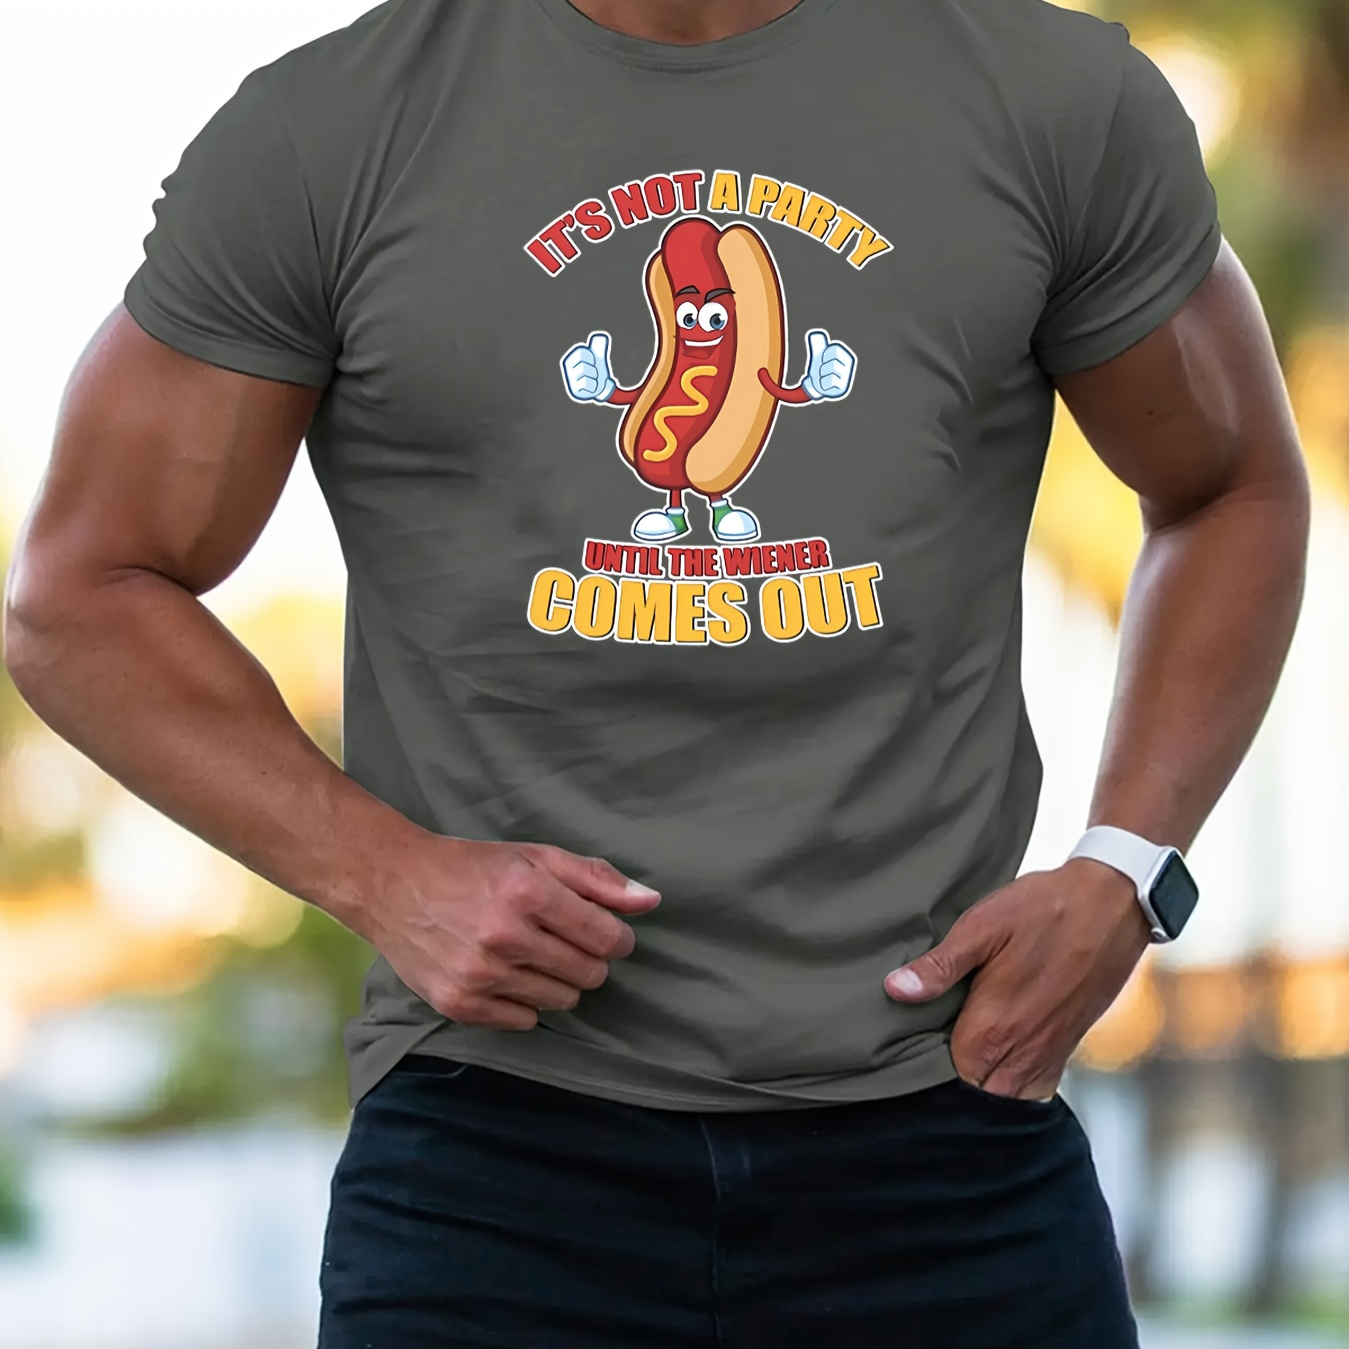 

Hot Dog Party Printed Men's Short-sleeve T-shirt, Can Be Worn In Summer, Comfortable And Breathable